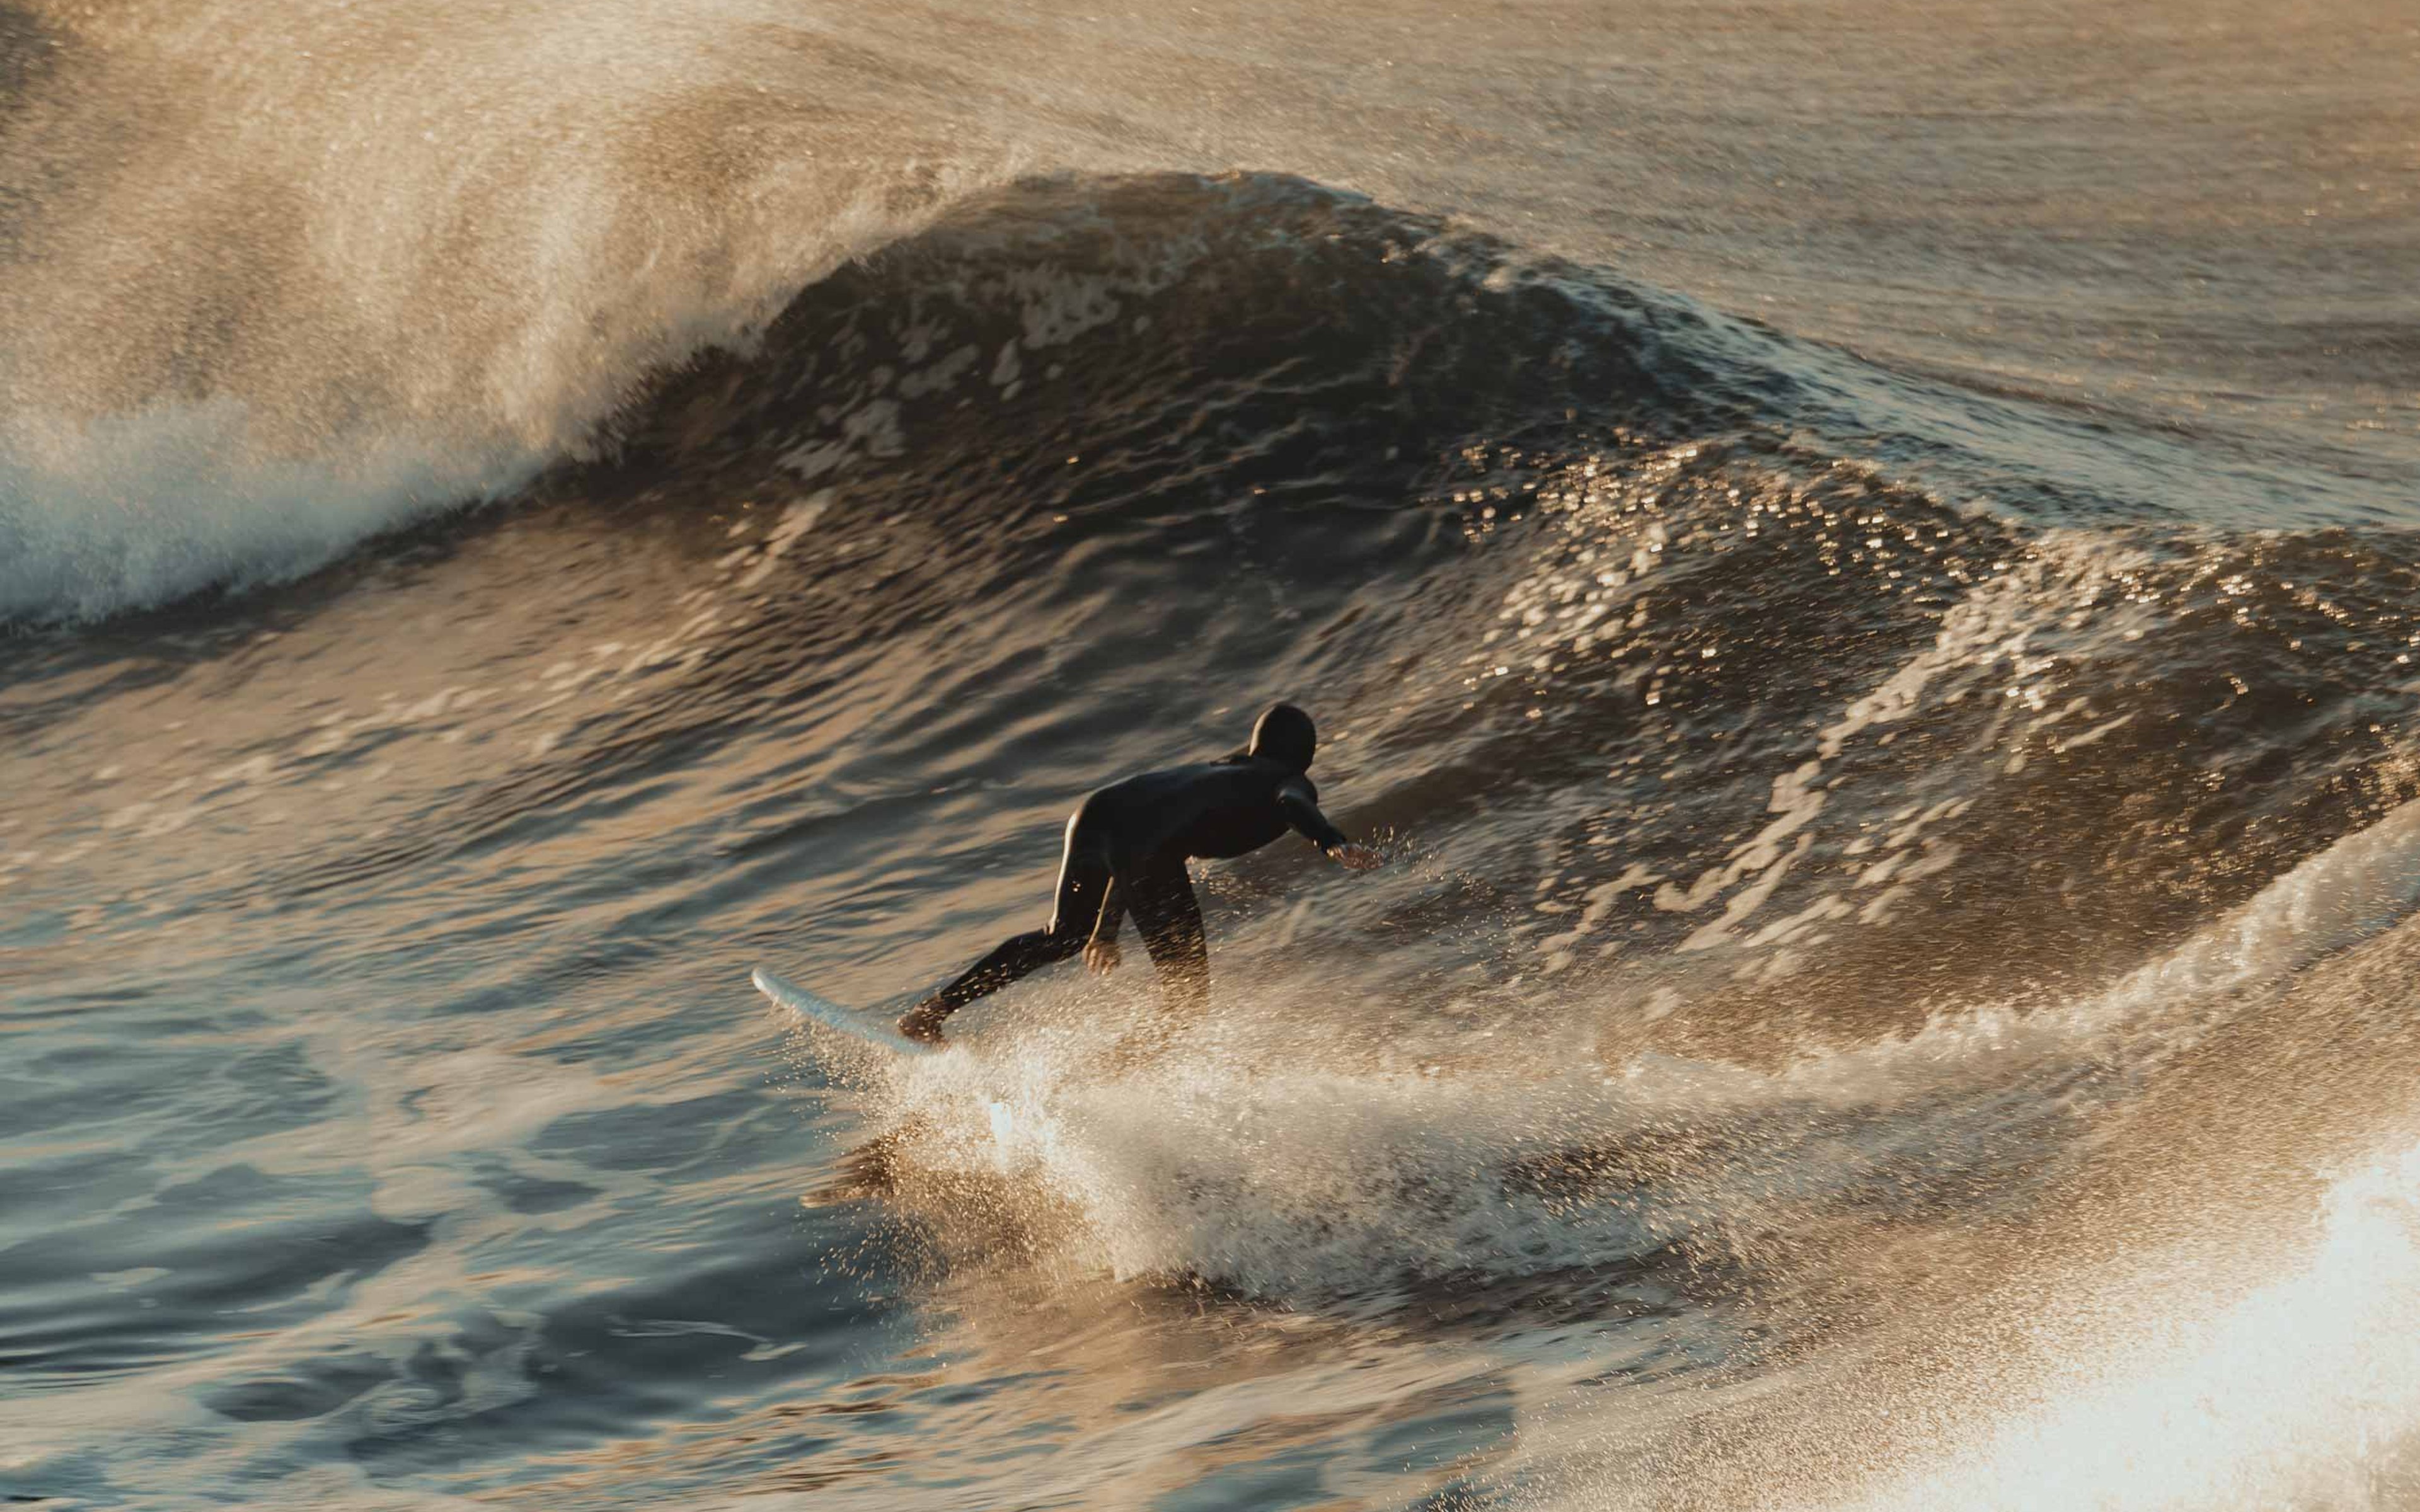 A surfer in the middle of a crashing wave at sunset.